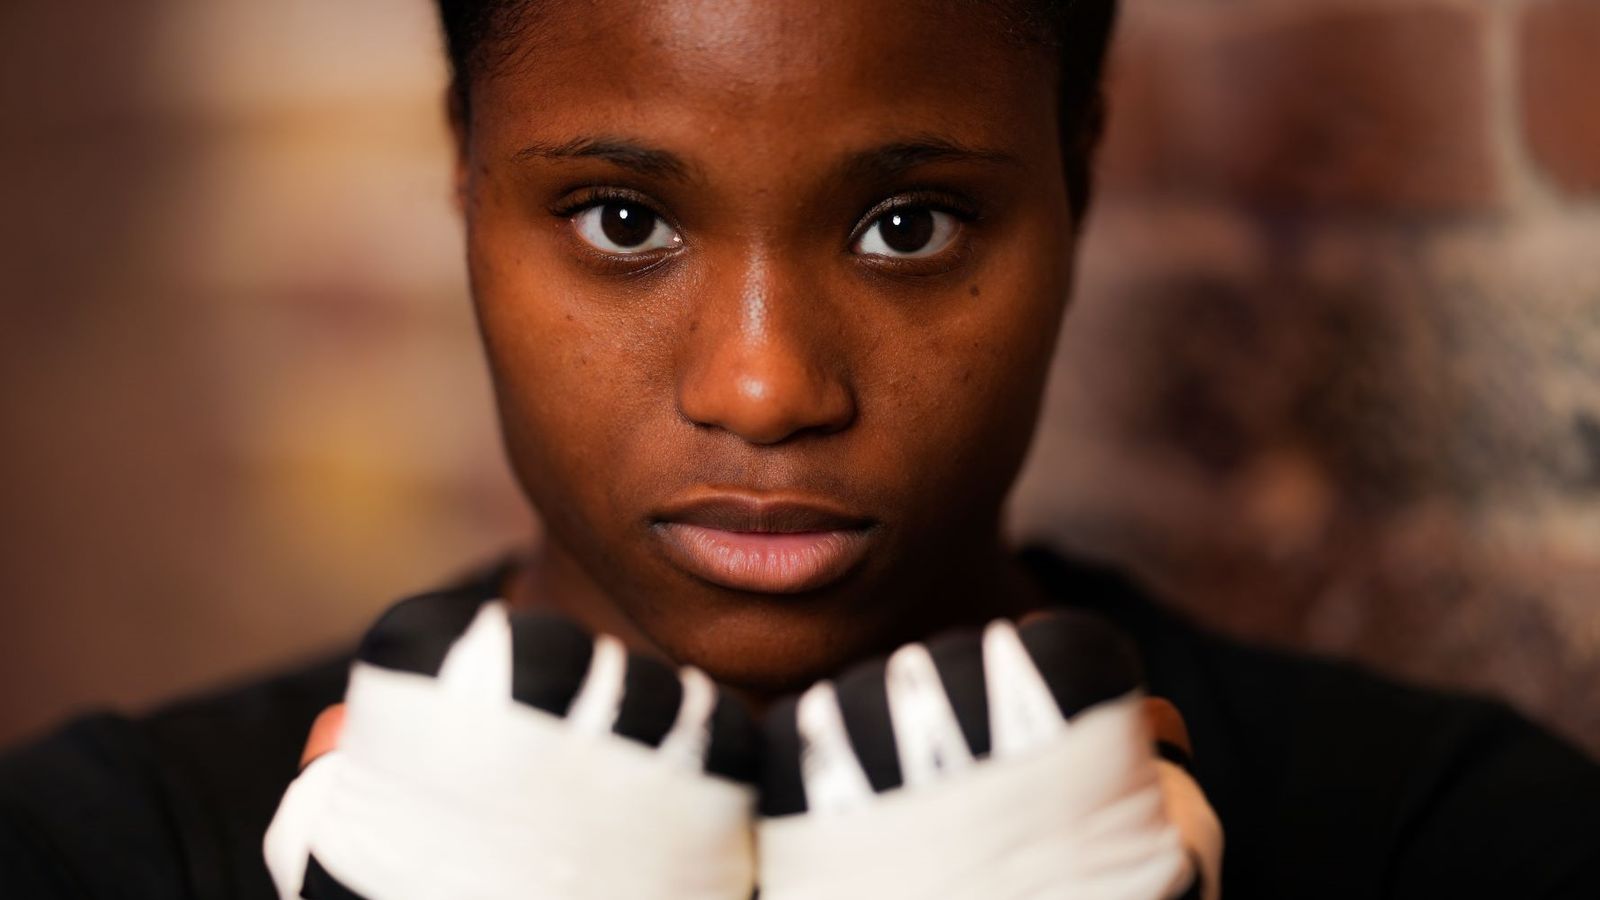 Caroline Dubois is determined to headline soon: ‘I want to be in fights that scare me’